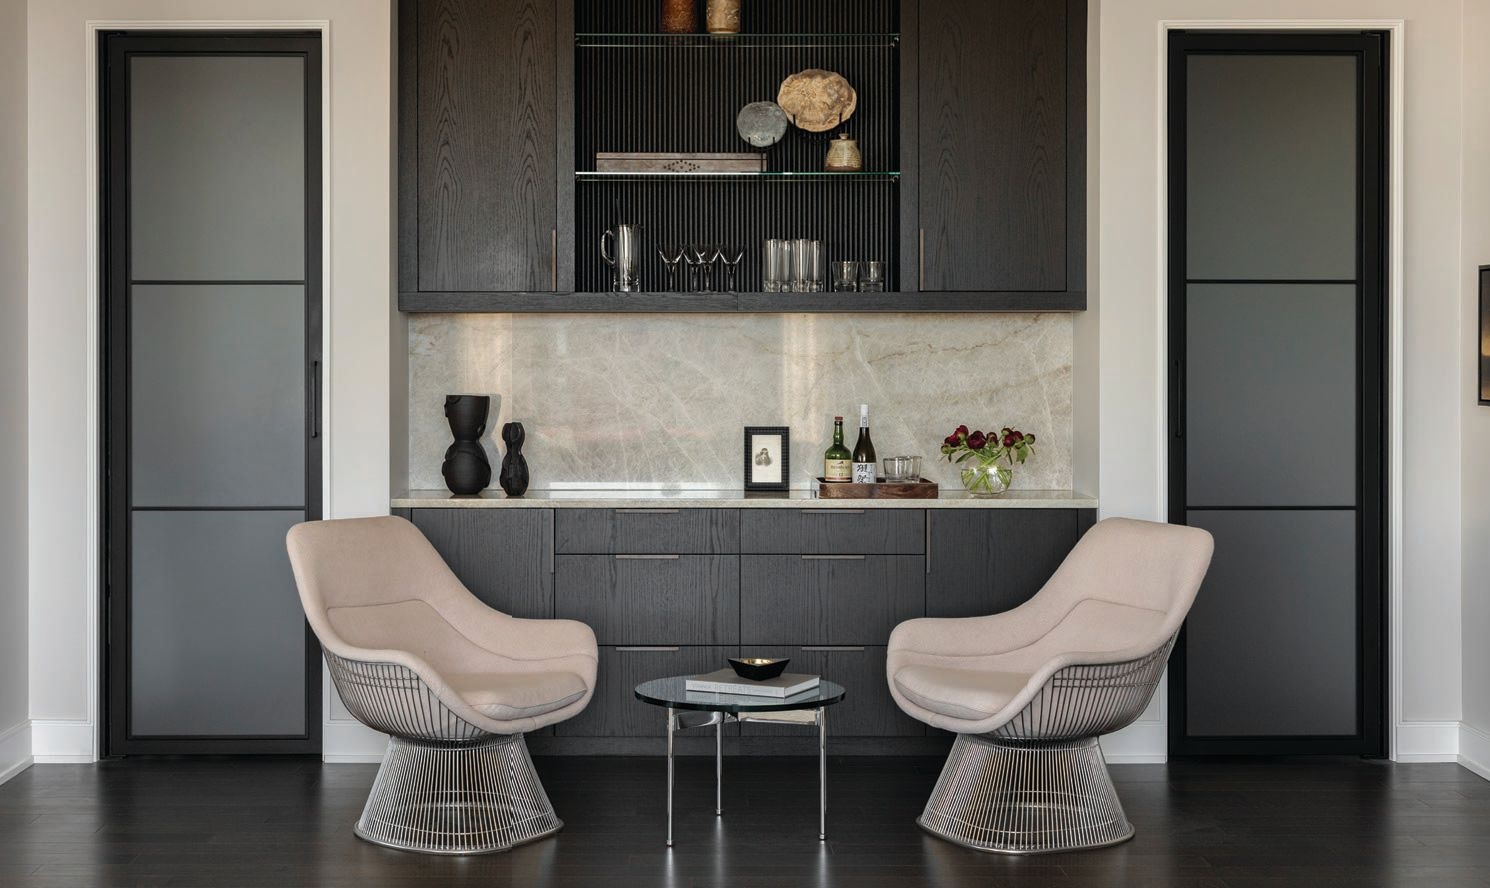 A pair of Planter chairs sit in the bar/pantry area PHOTOGRAPHED BY AIMÉE MAZZENGA